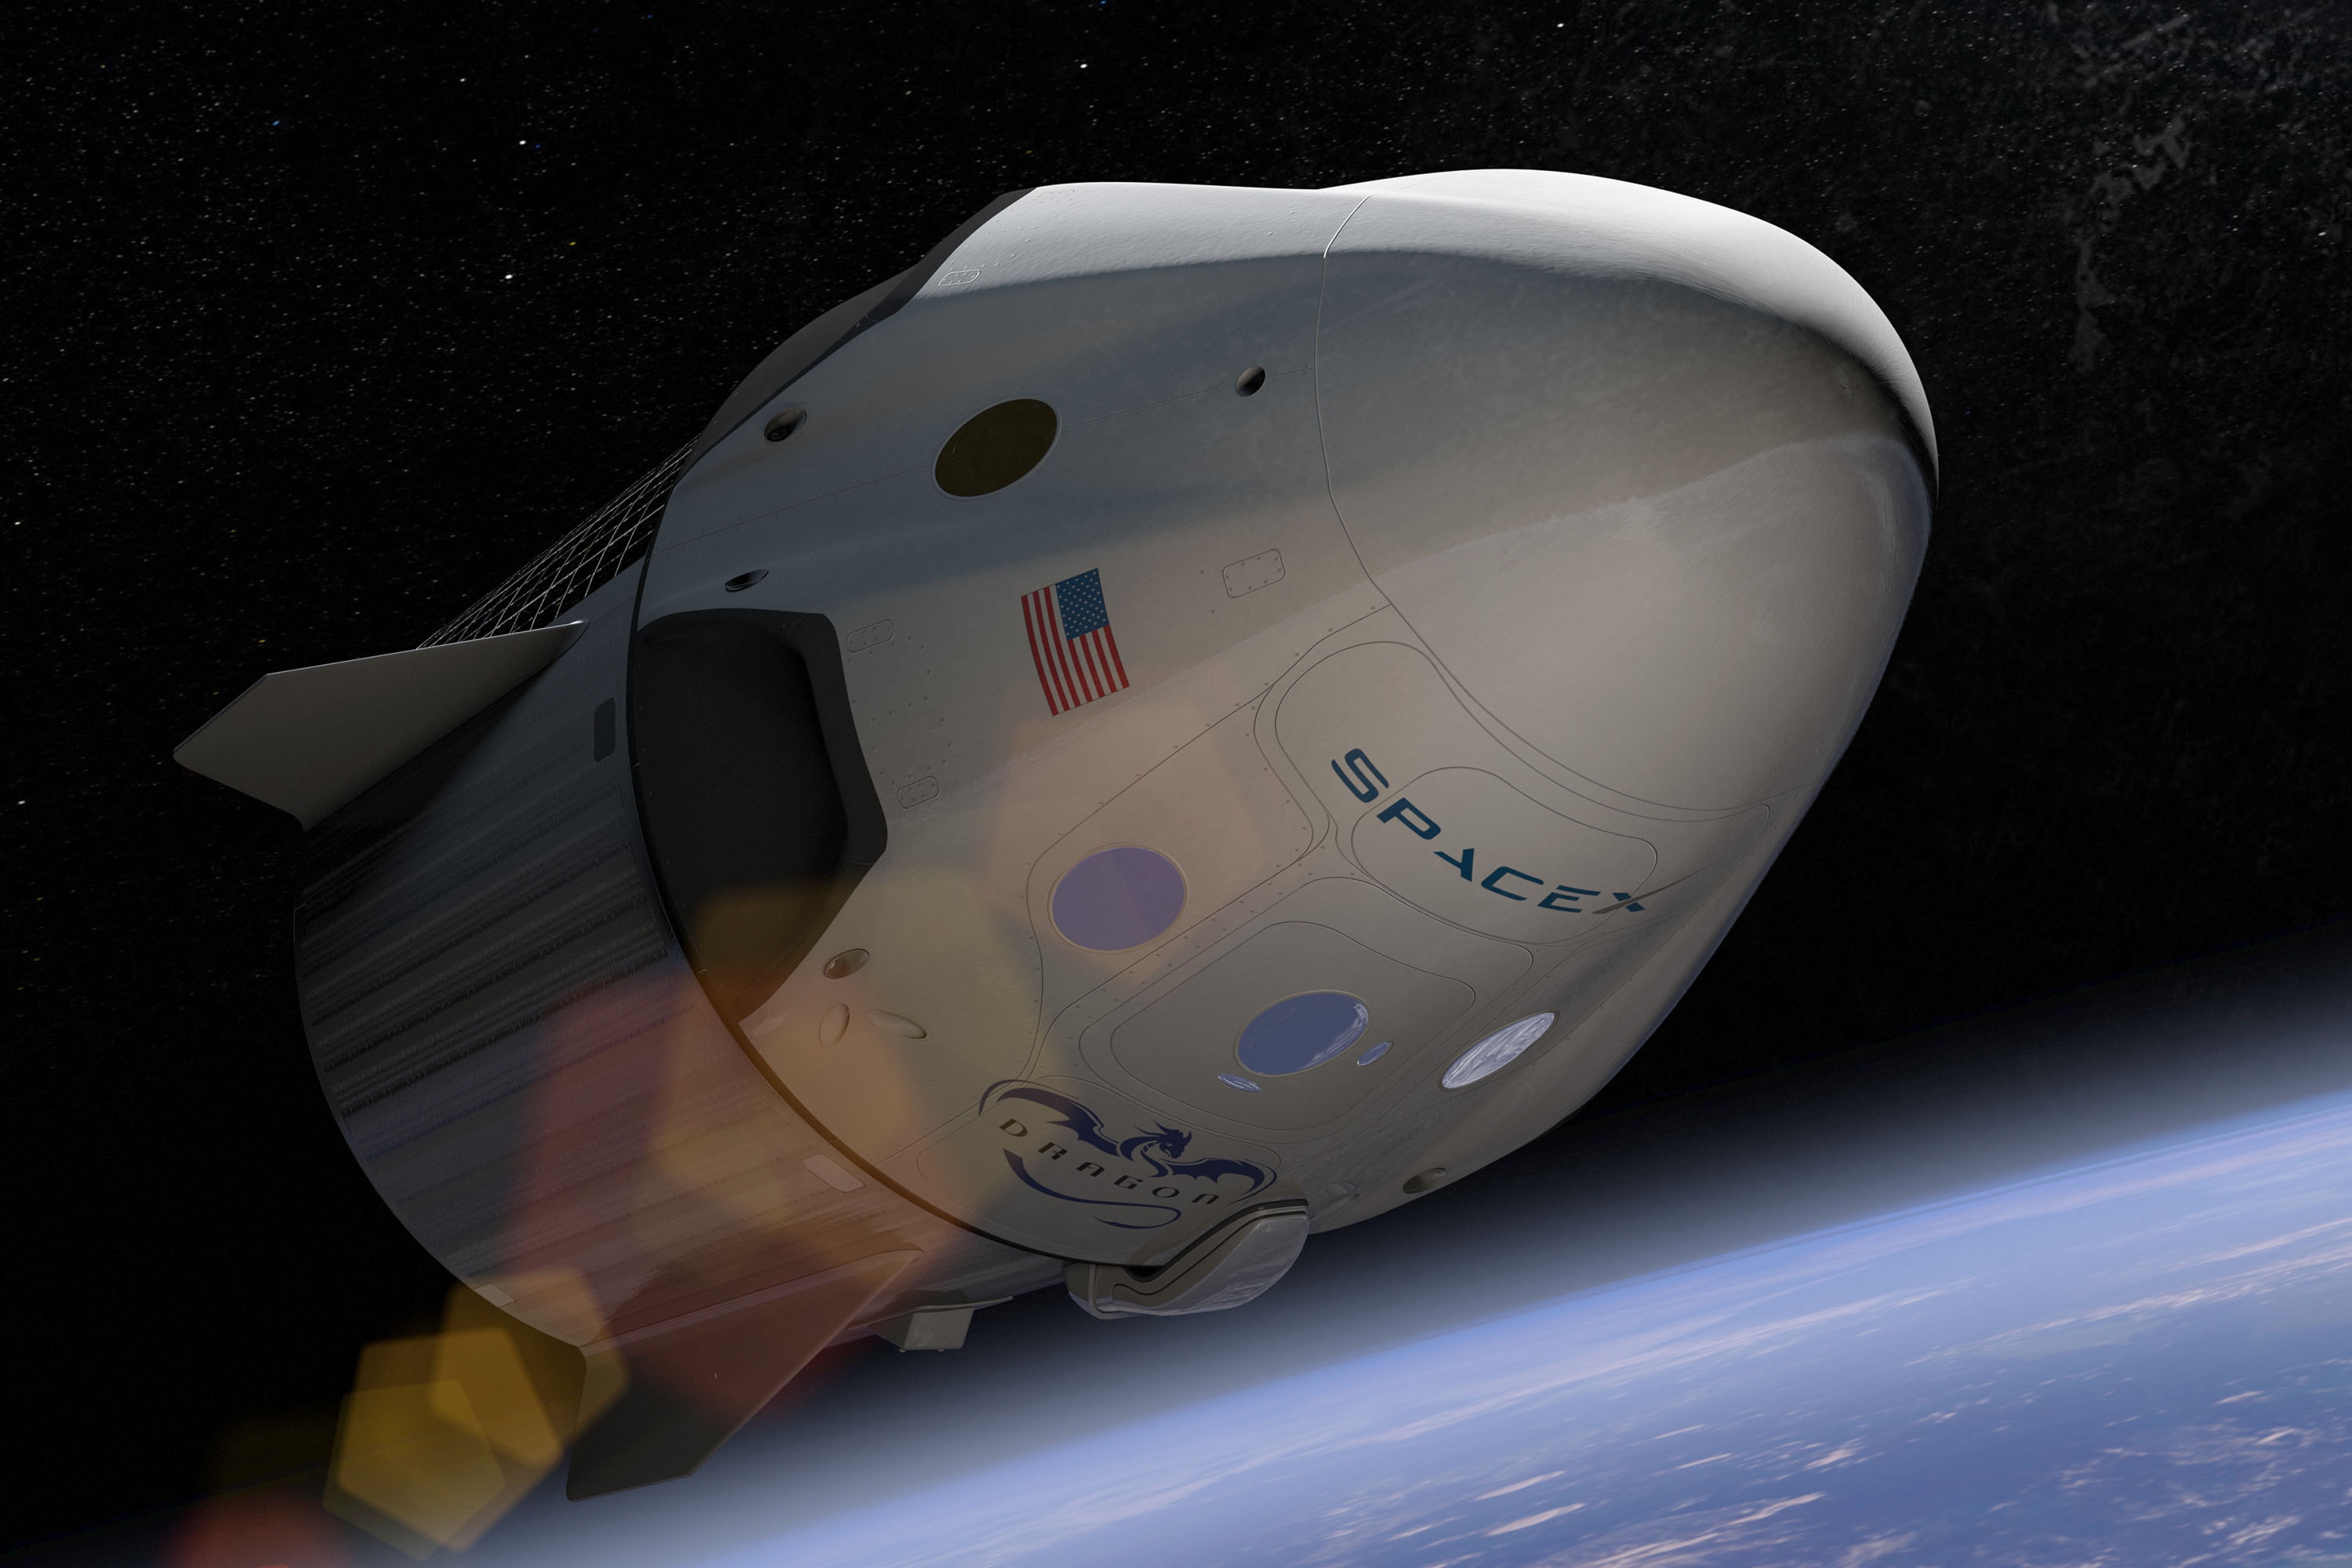 The SpaceX